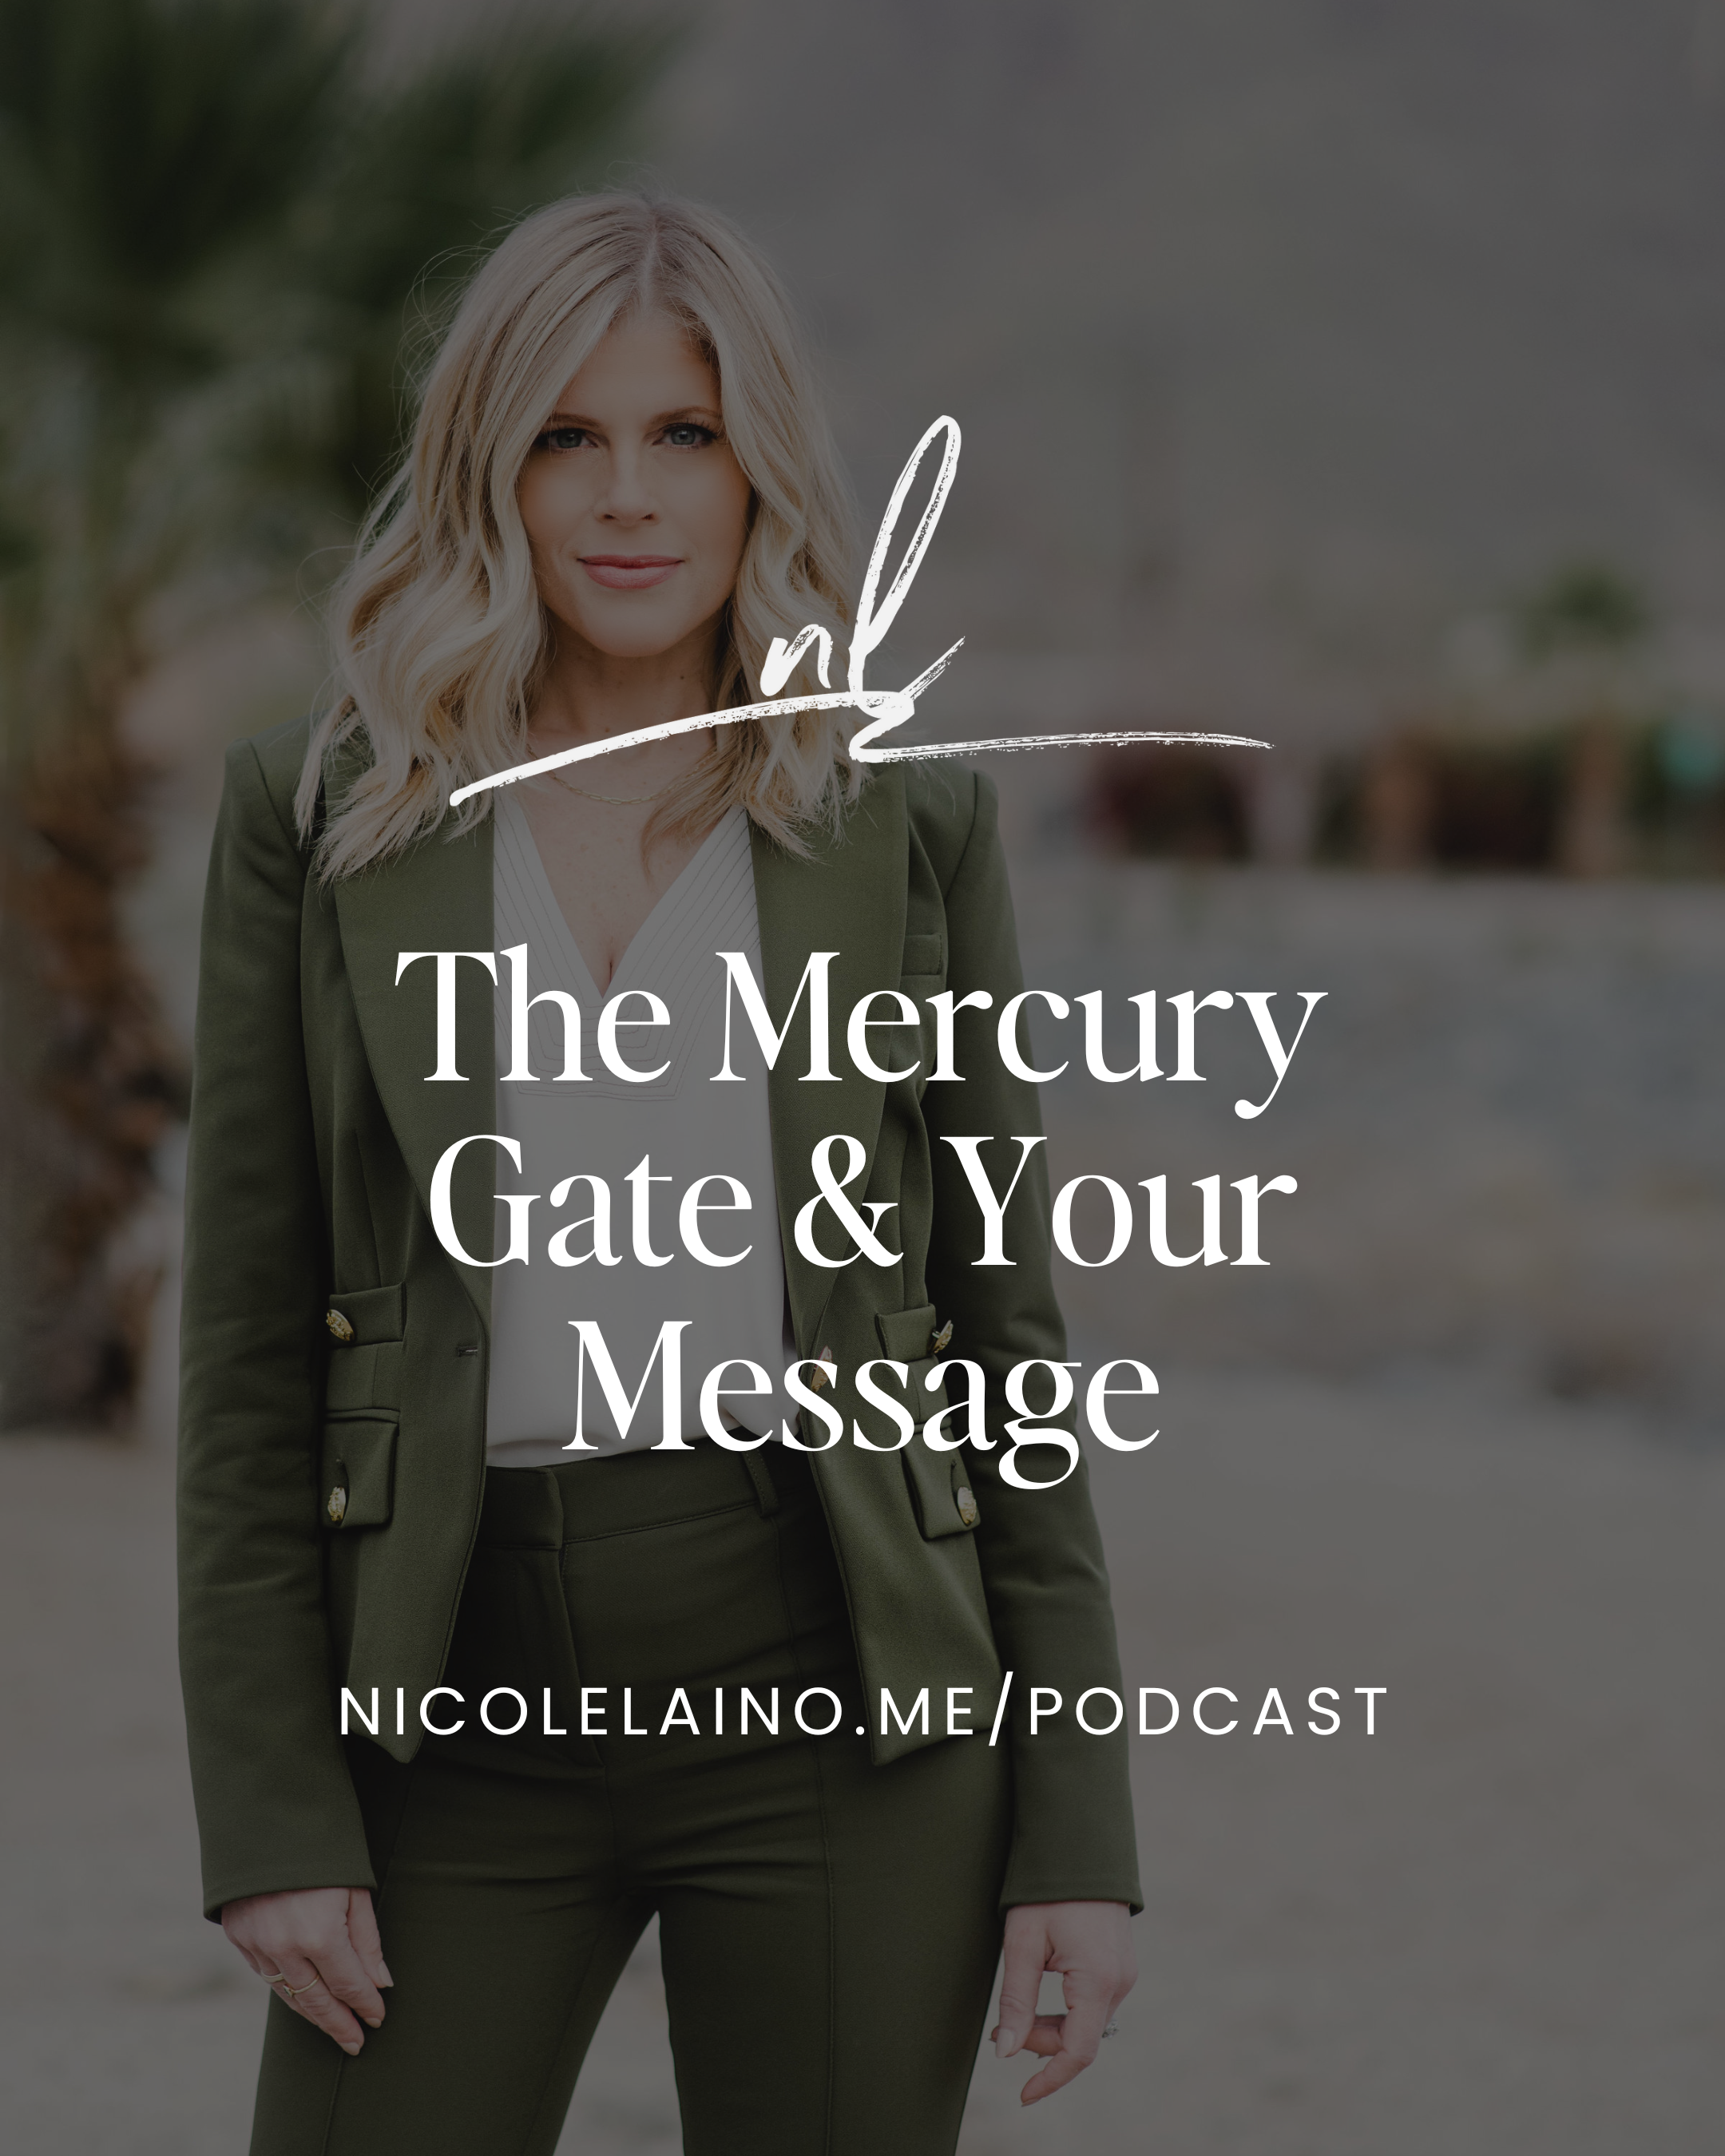 The Mercury Gate & Your Message